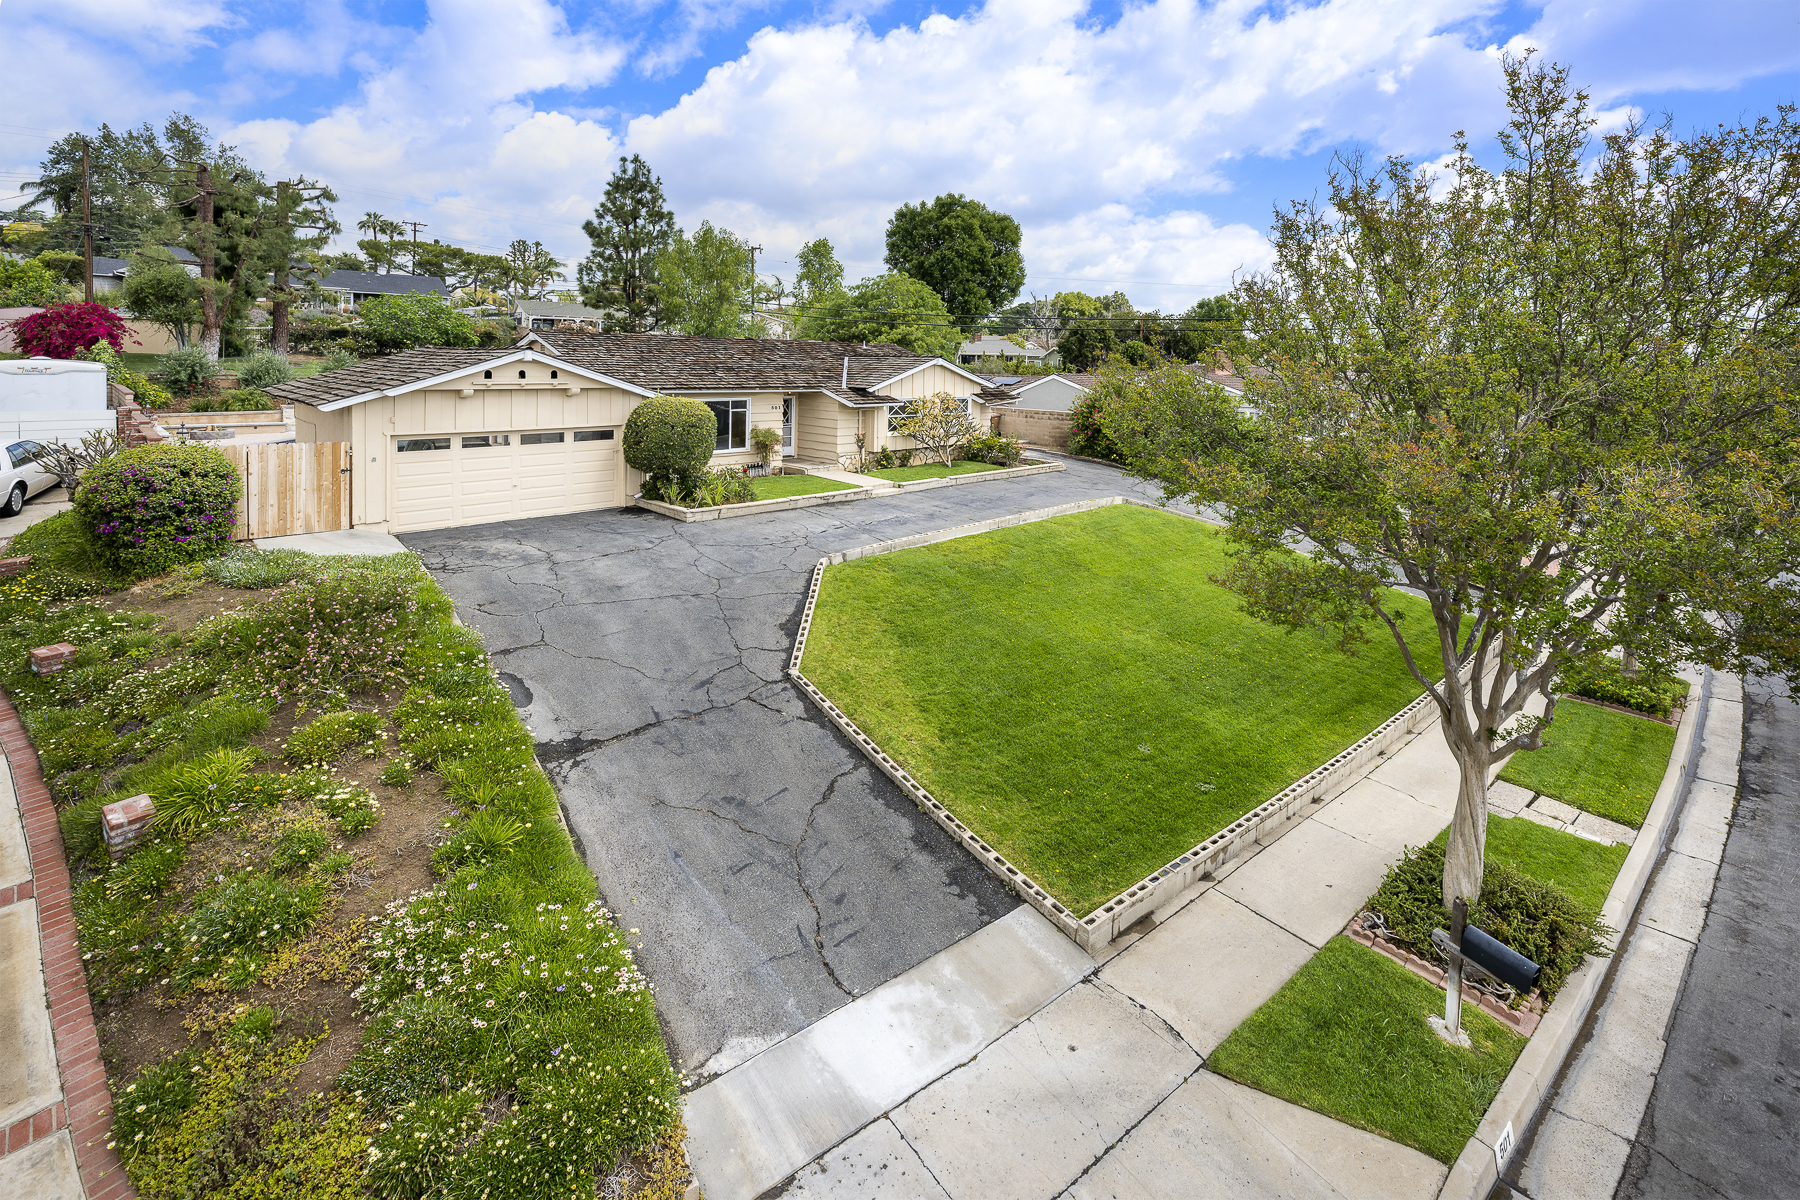 501 Dorothy Drive: Left aerial driveway shot with garage and left side yard in view